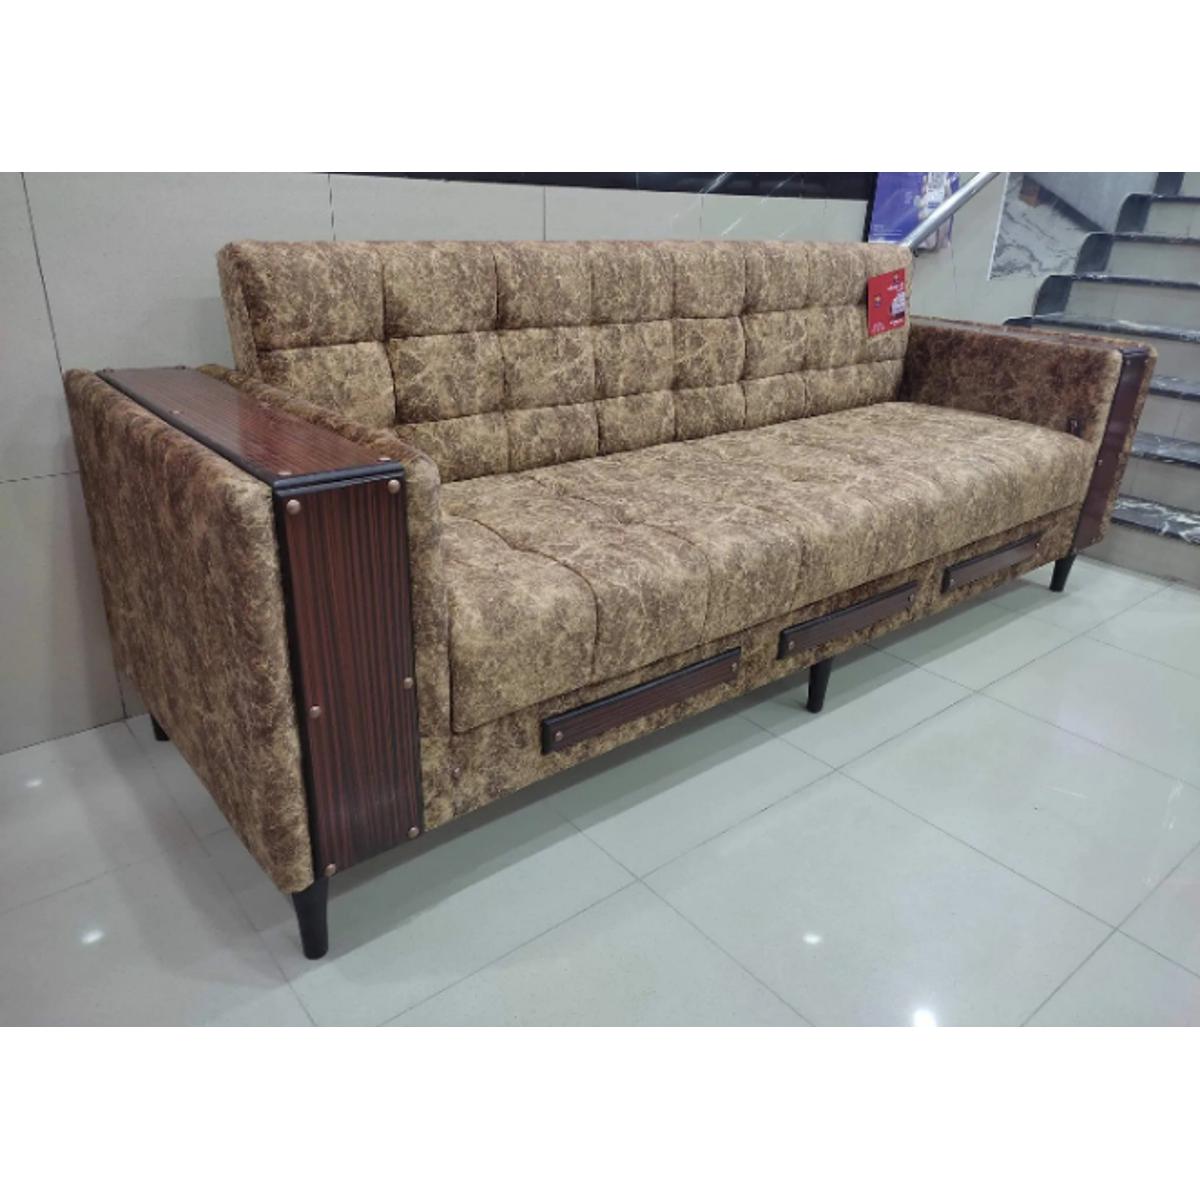 Turkish Style Sofa Comes Bed Customize